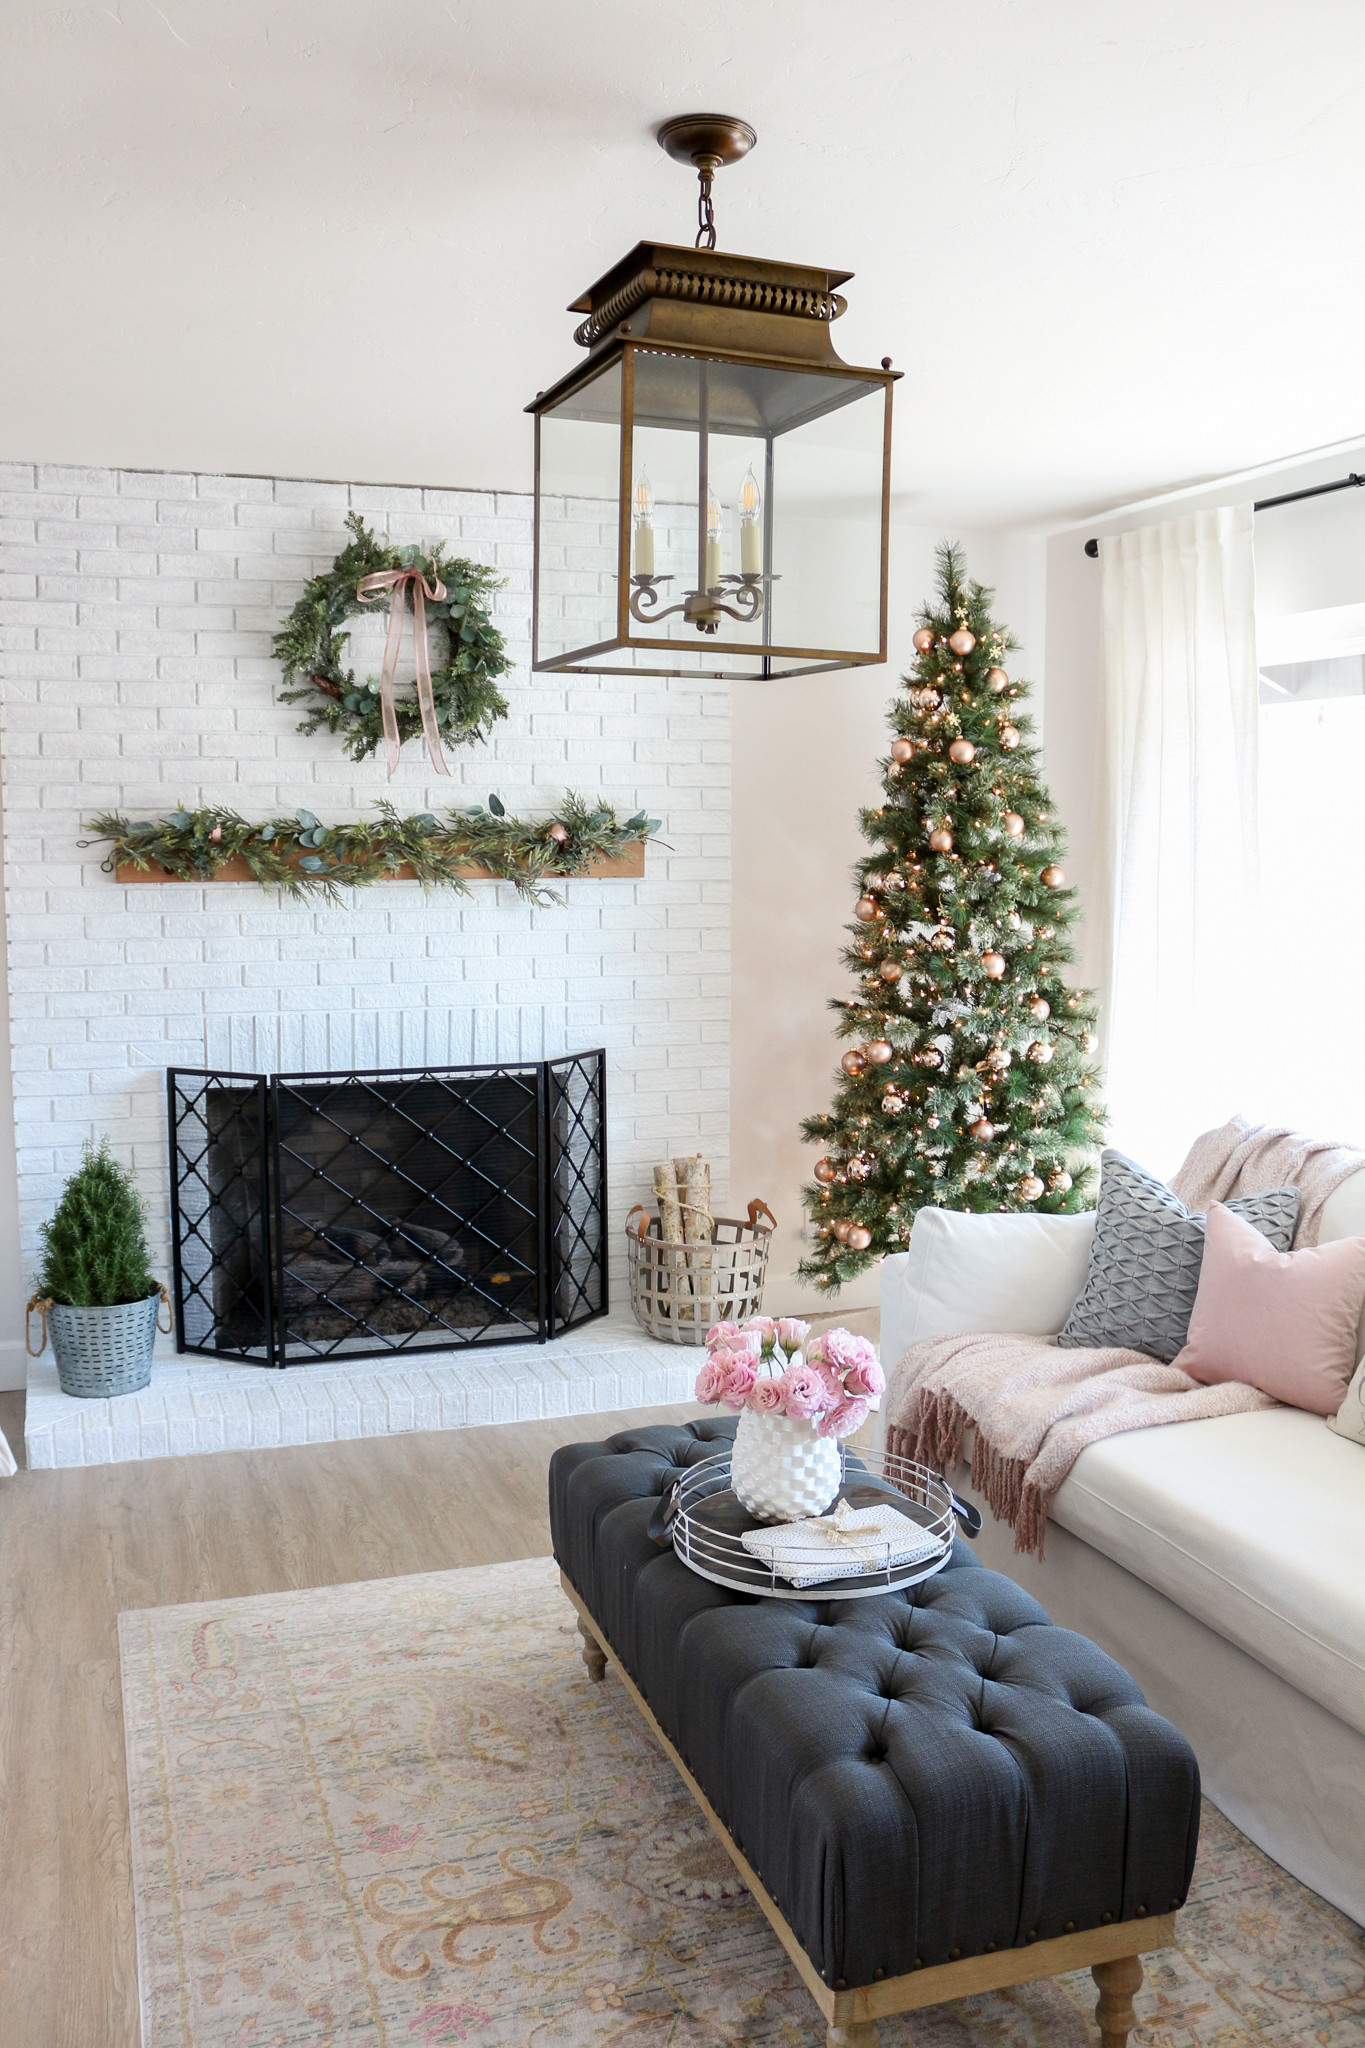 Farmhouse Chic Living Room
 Modern Farmhouse Style Living Room Holiday Tour